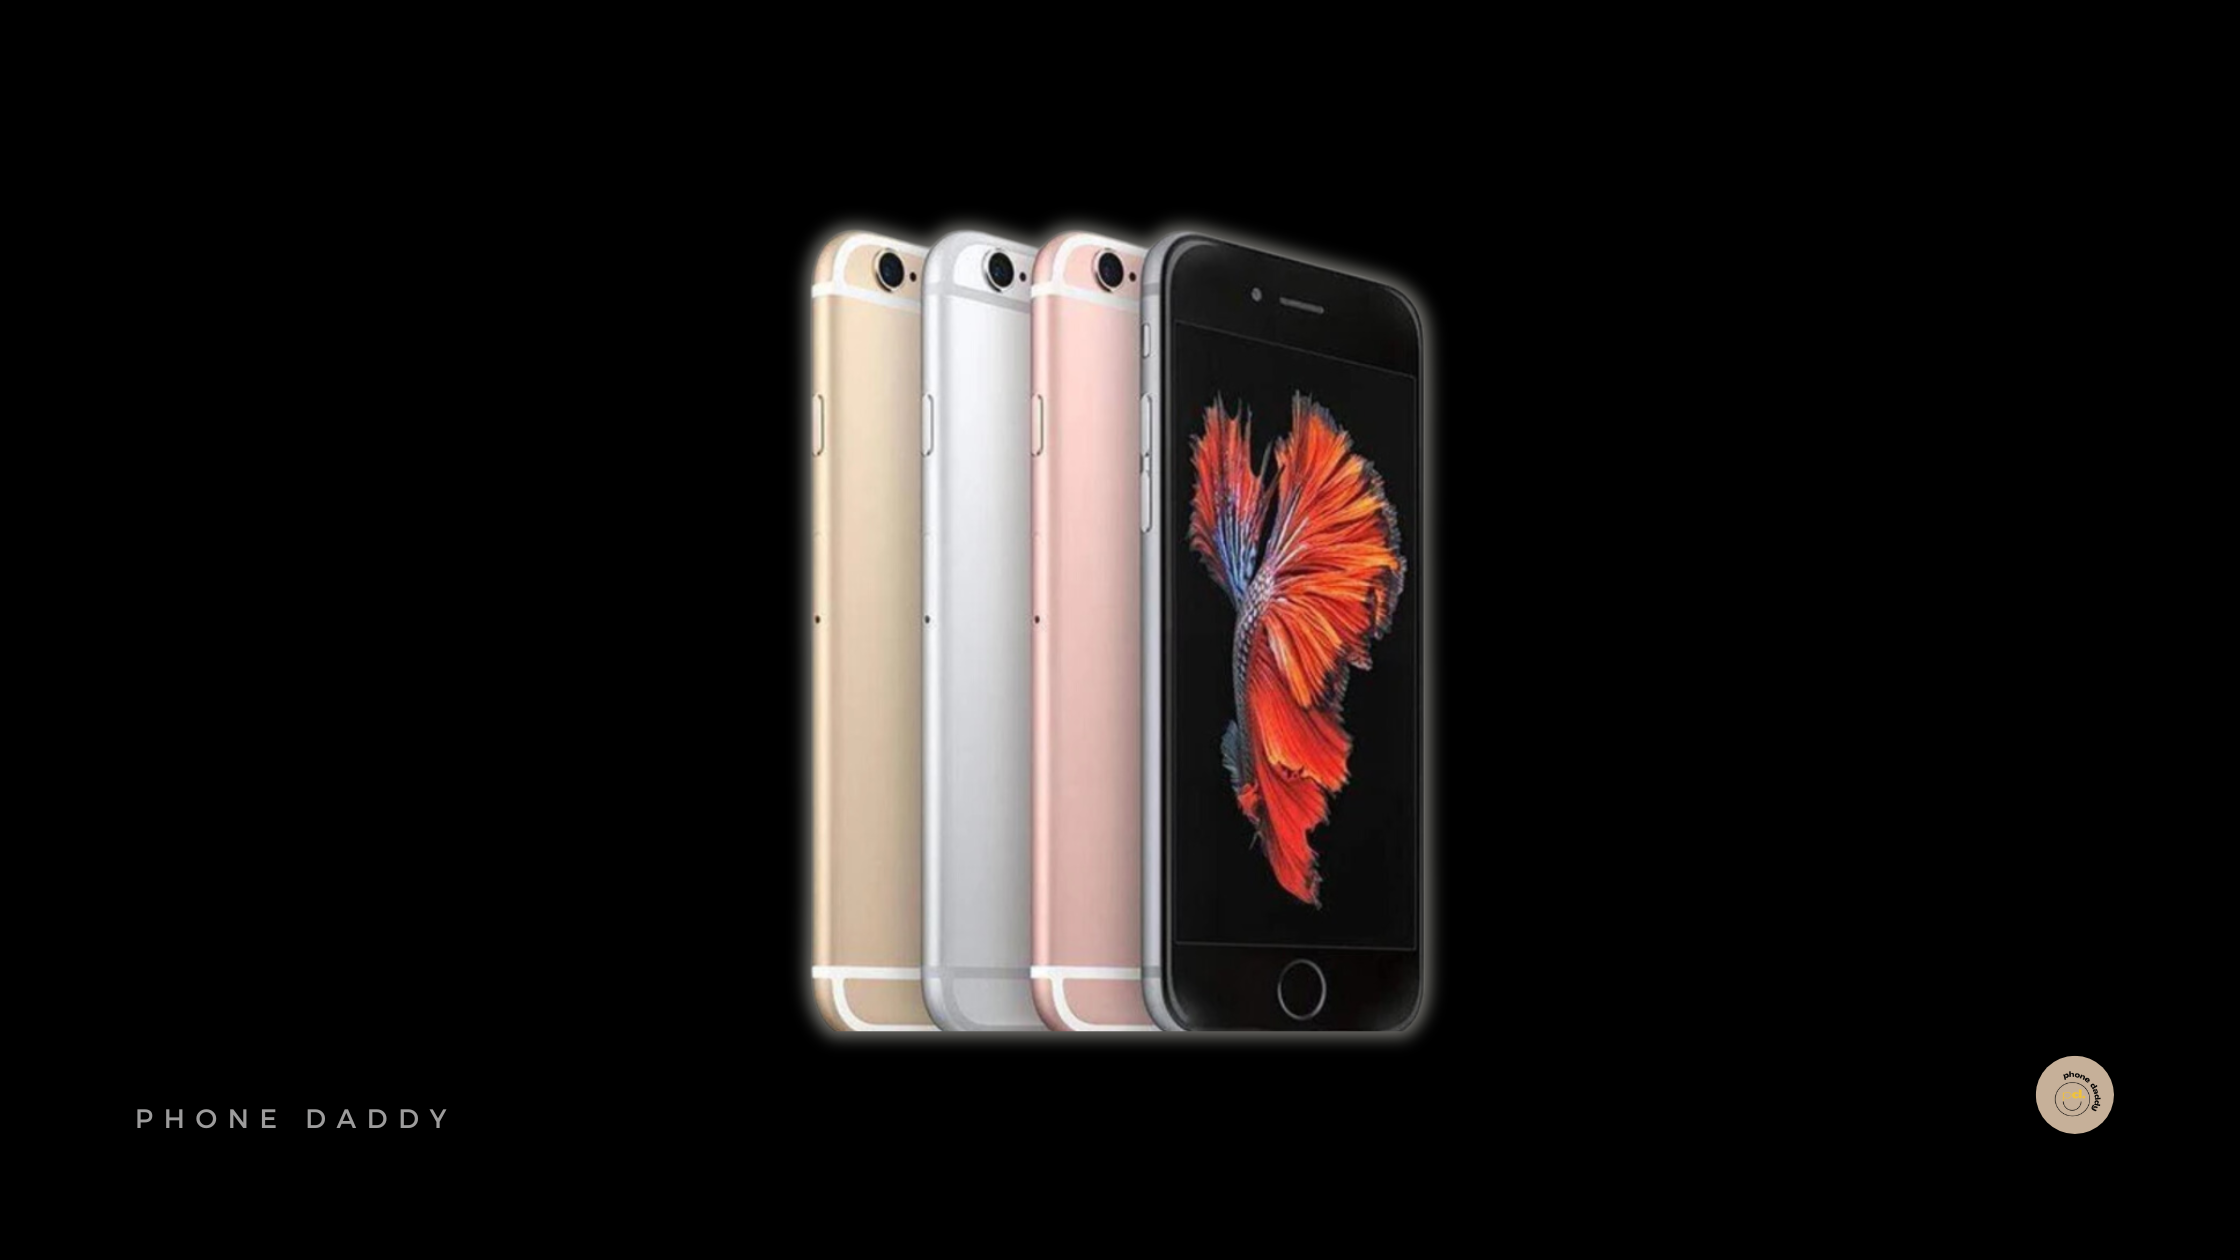 iPhone 6s: Update, Keep, or Upgrade? A Guide for Satisfied Users